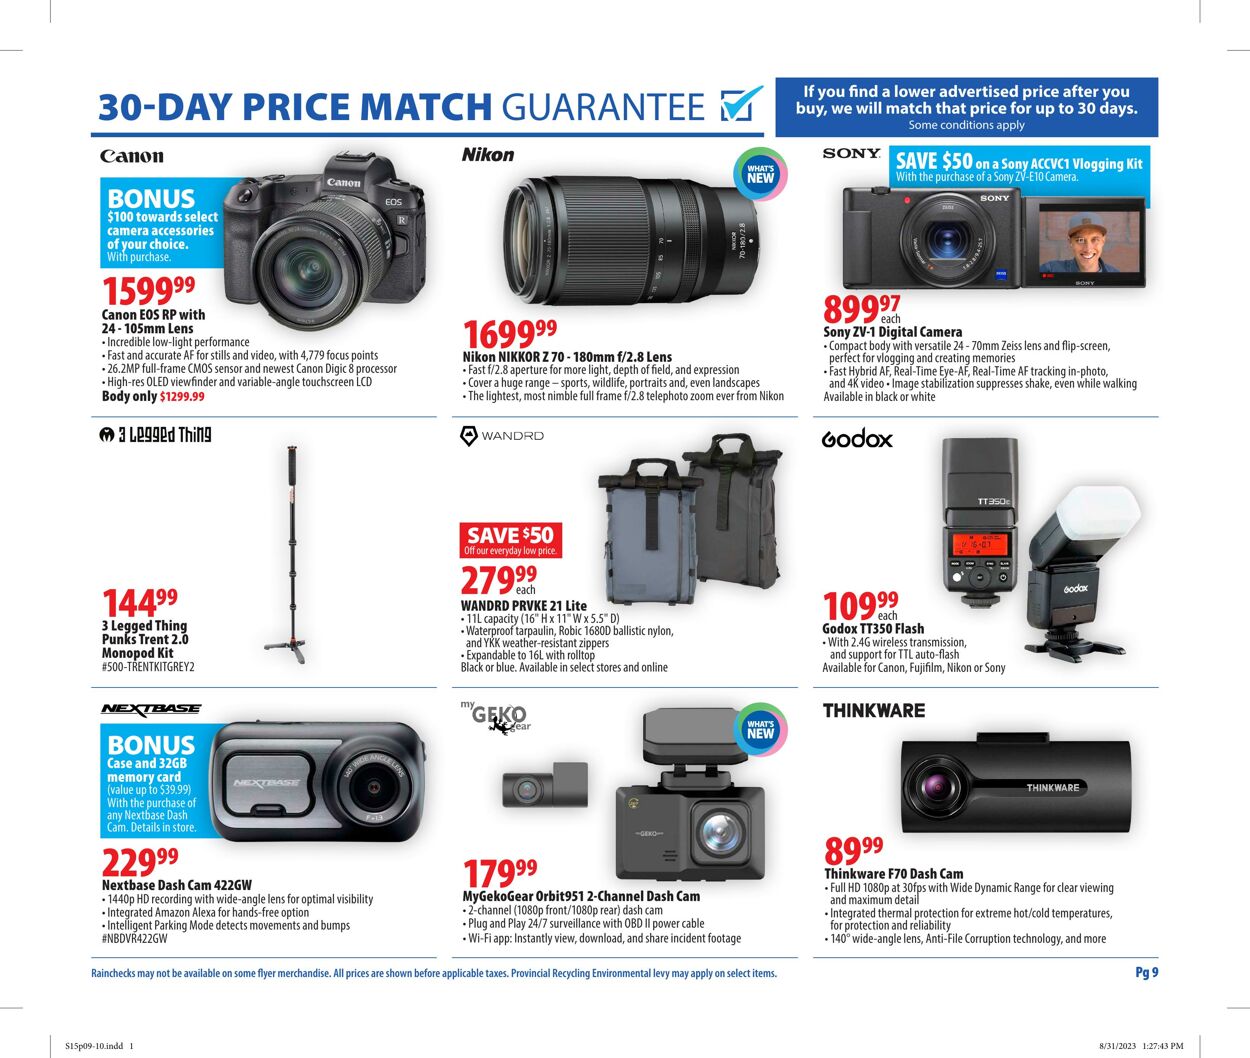 London Drugs Flyer from 09/15/2023